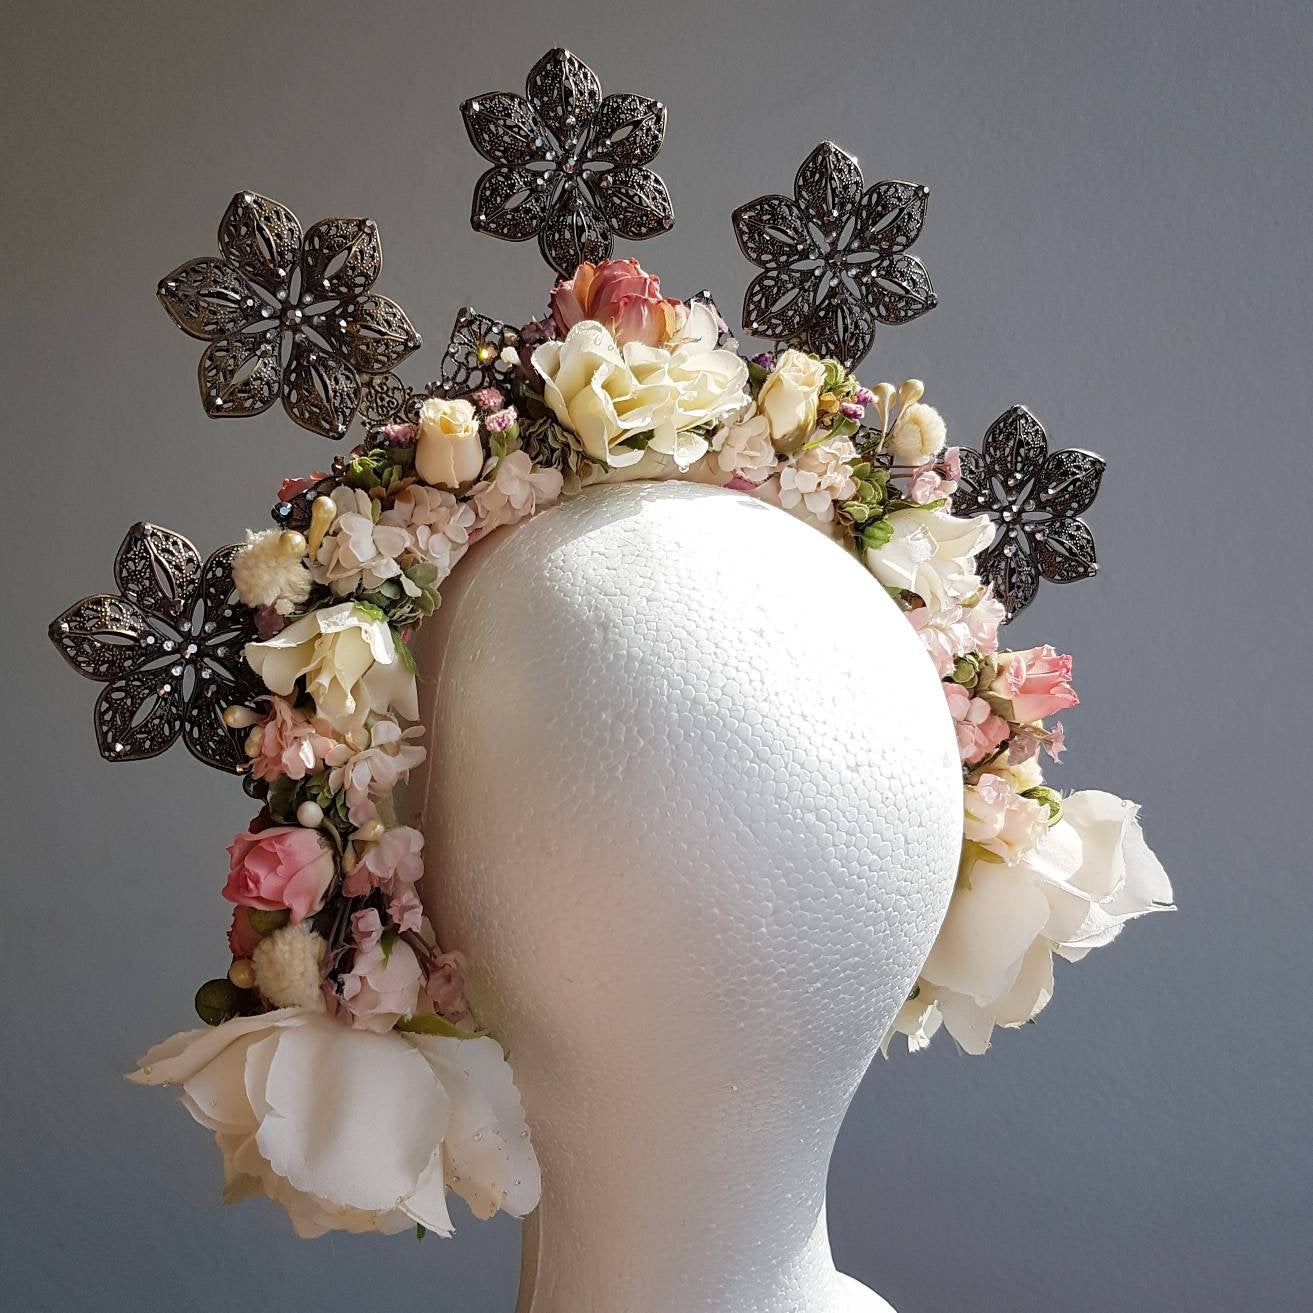 Morning Star Wedding Collection: the Touch of Dew Bridal Crown